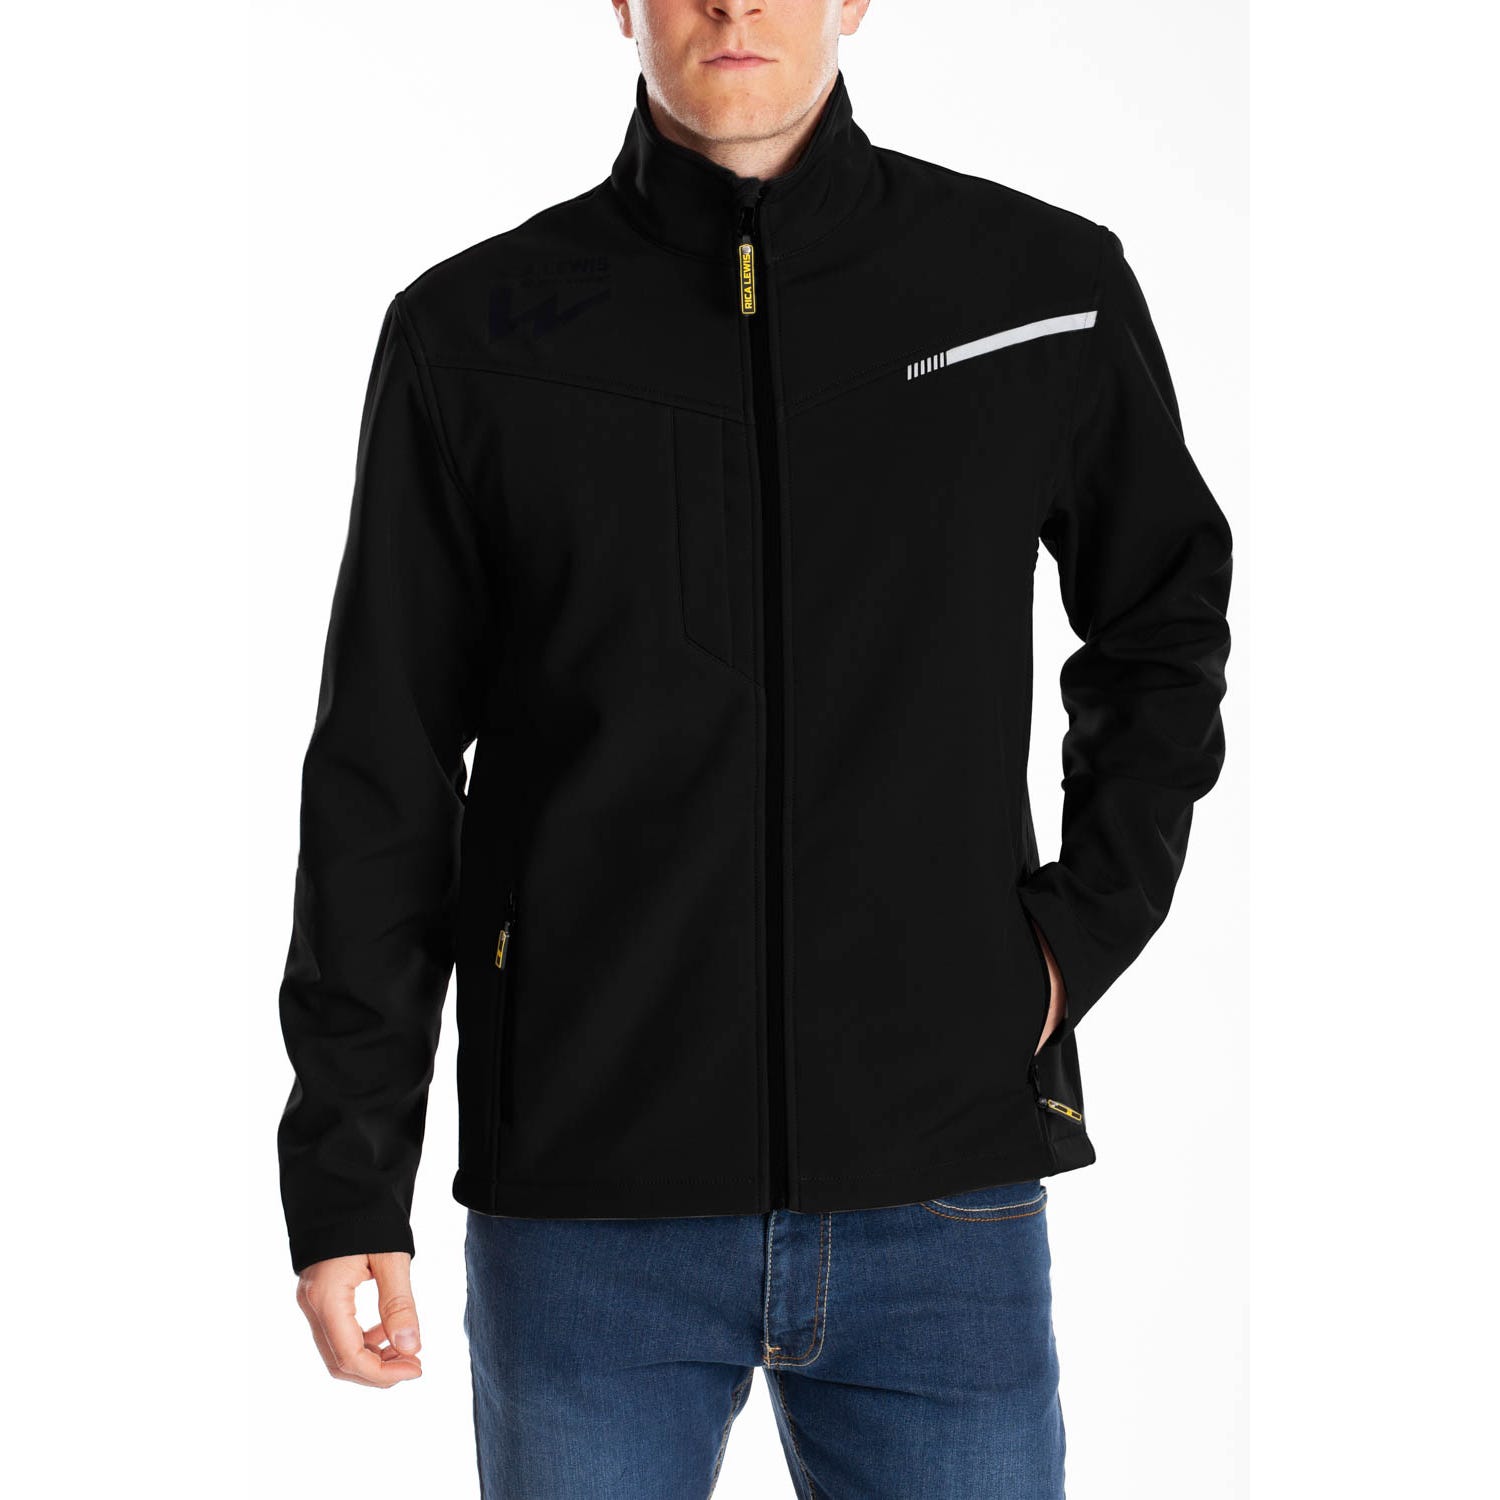 Veste softshell coupe confort BOBBY 'Rica Lewis' 0